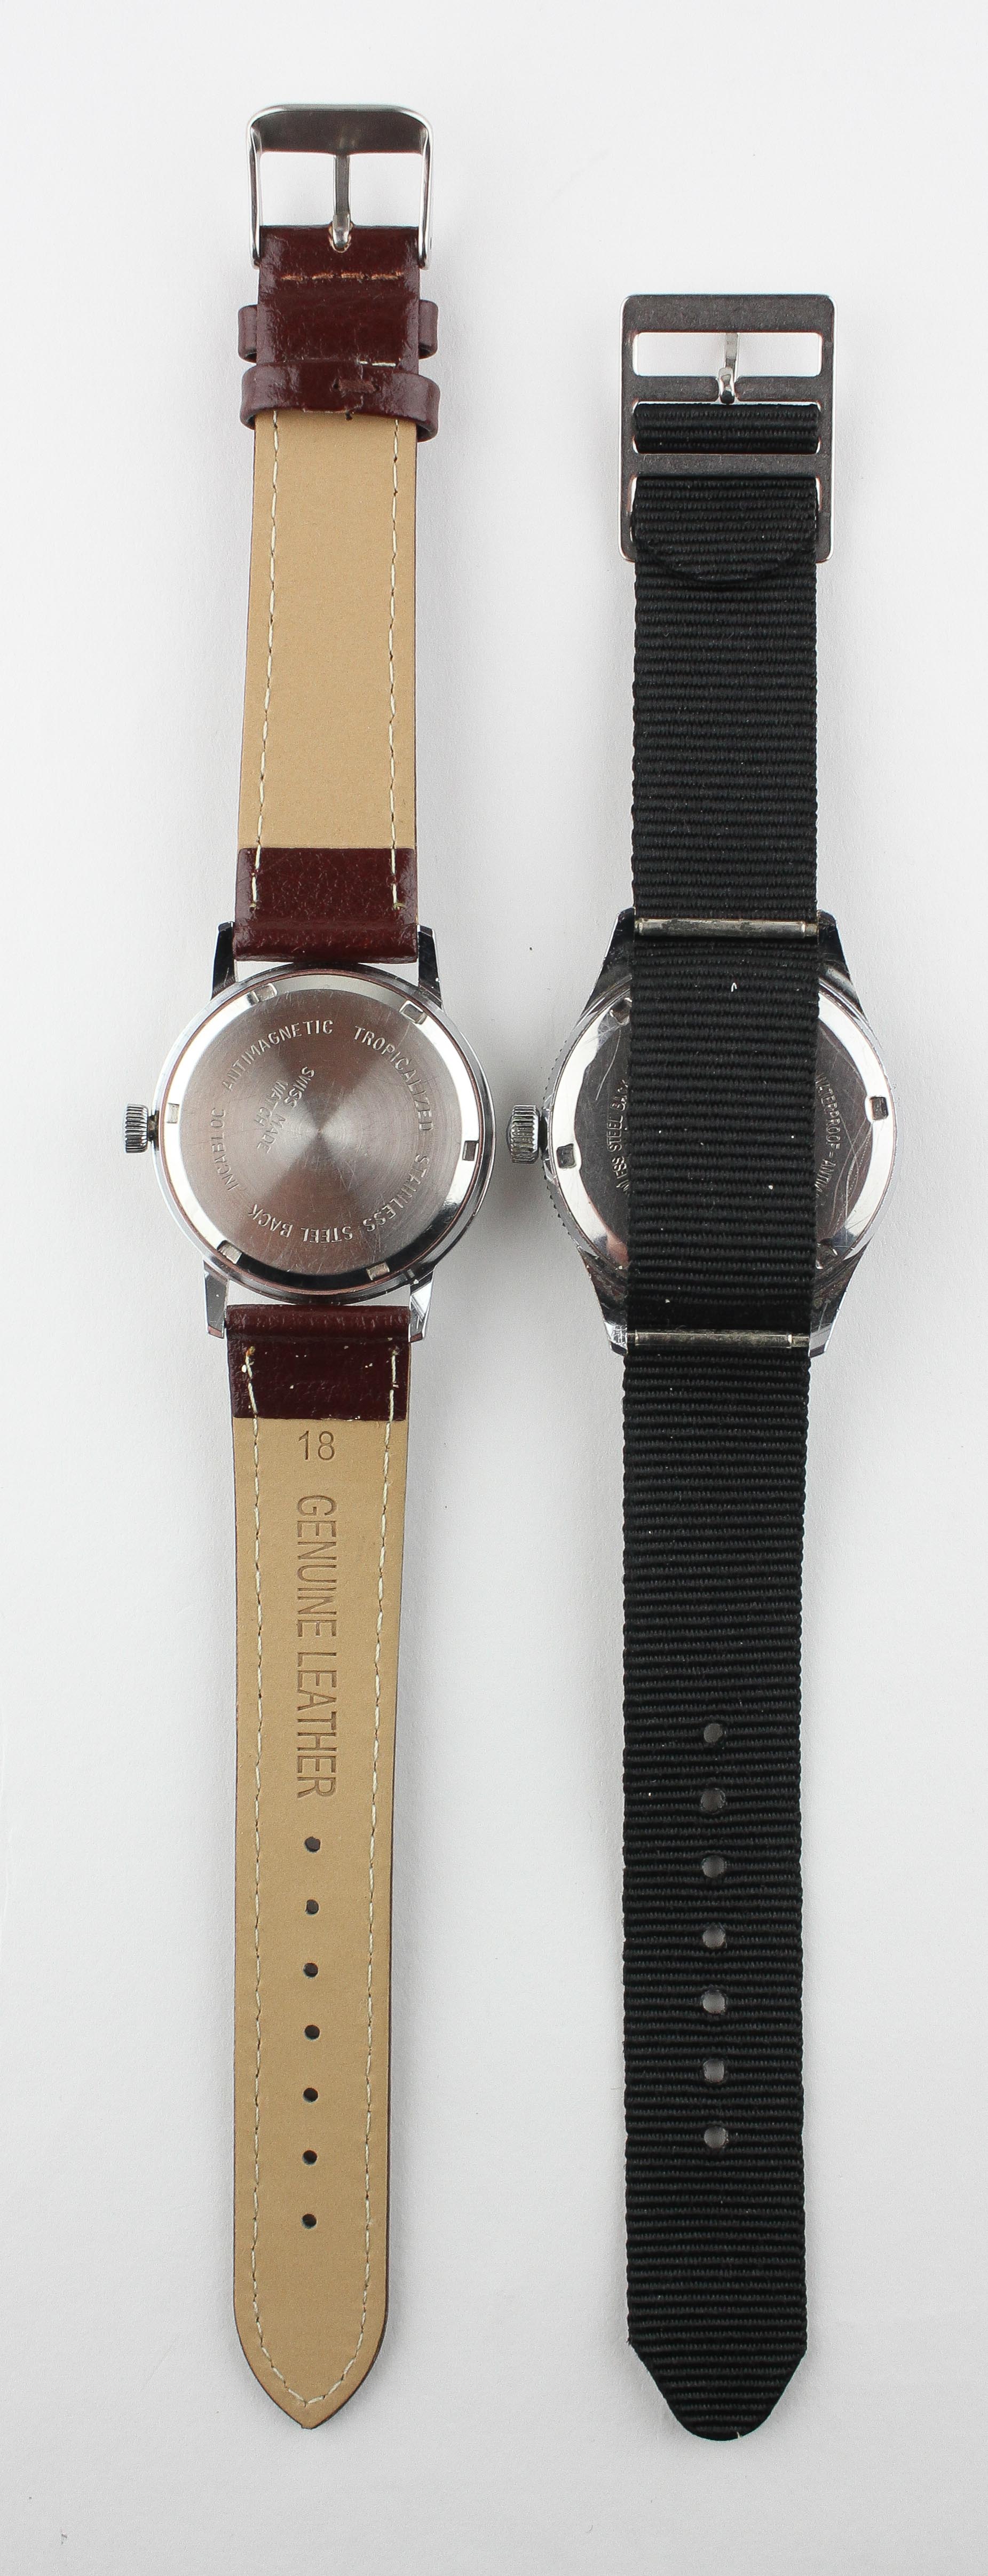 A stainless steel Roamer wristwatch, manual wind movement, brown leather strap. - Image 3 of 3